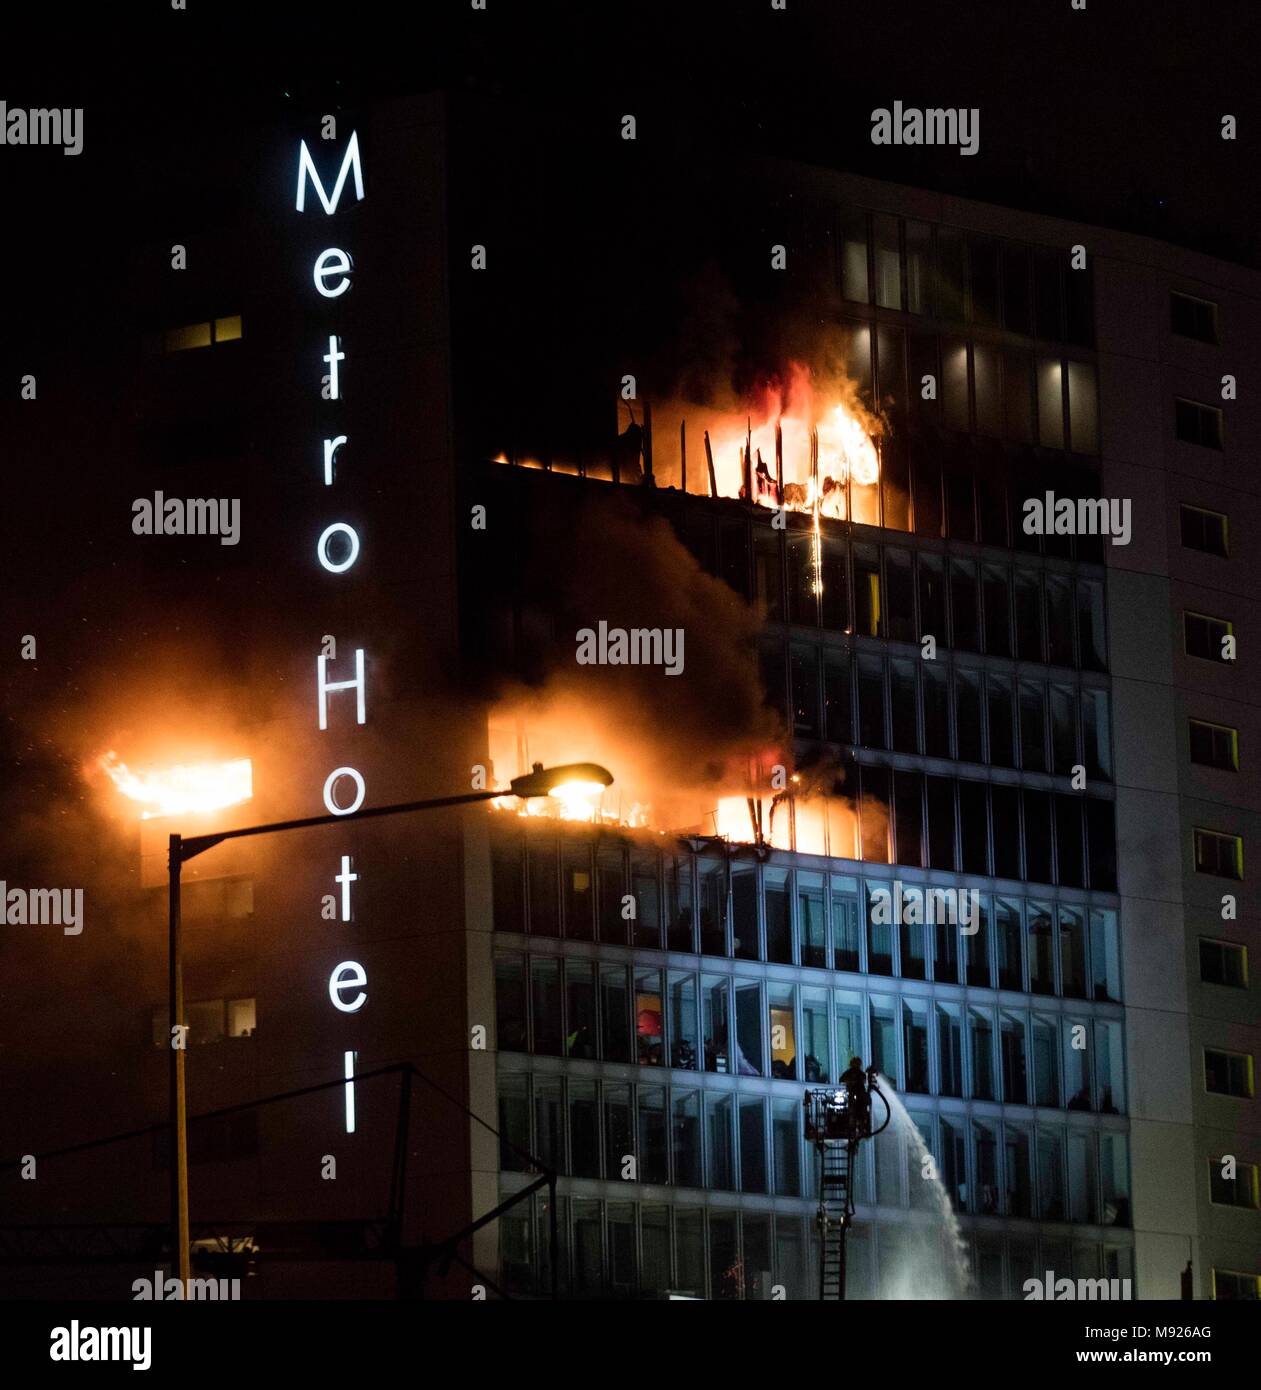 Dublin, Ireland. 21st March, 2018. 21/3/2018. Metro Hotel Fire Ballymun, Dublin Ireland. Fire takes hold of the Metro Hotel in Ballymun in Dublin. There were no casualties as 150 people were evacuated from the hotel and apartment building on the nortside of Dublin City. It is believed the fire started in an apartment on the 13th floor of the building which until recently was used to house a number of homeless famlies. Photo: Eamonn Farrell/ Credit: /Alamy Live News Stock Photo